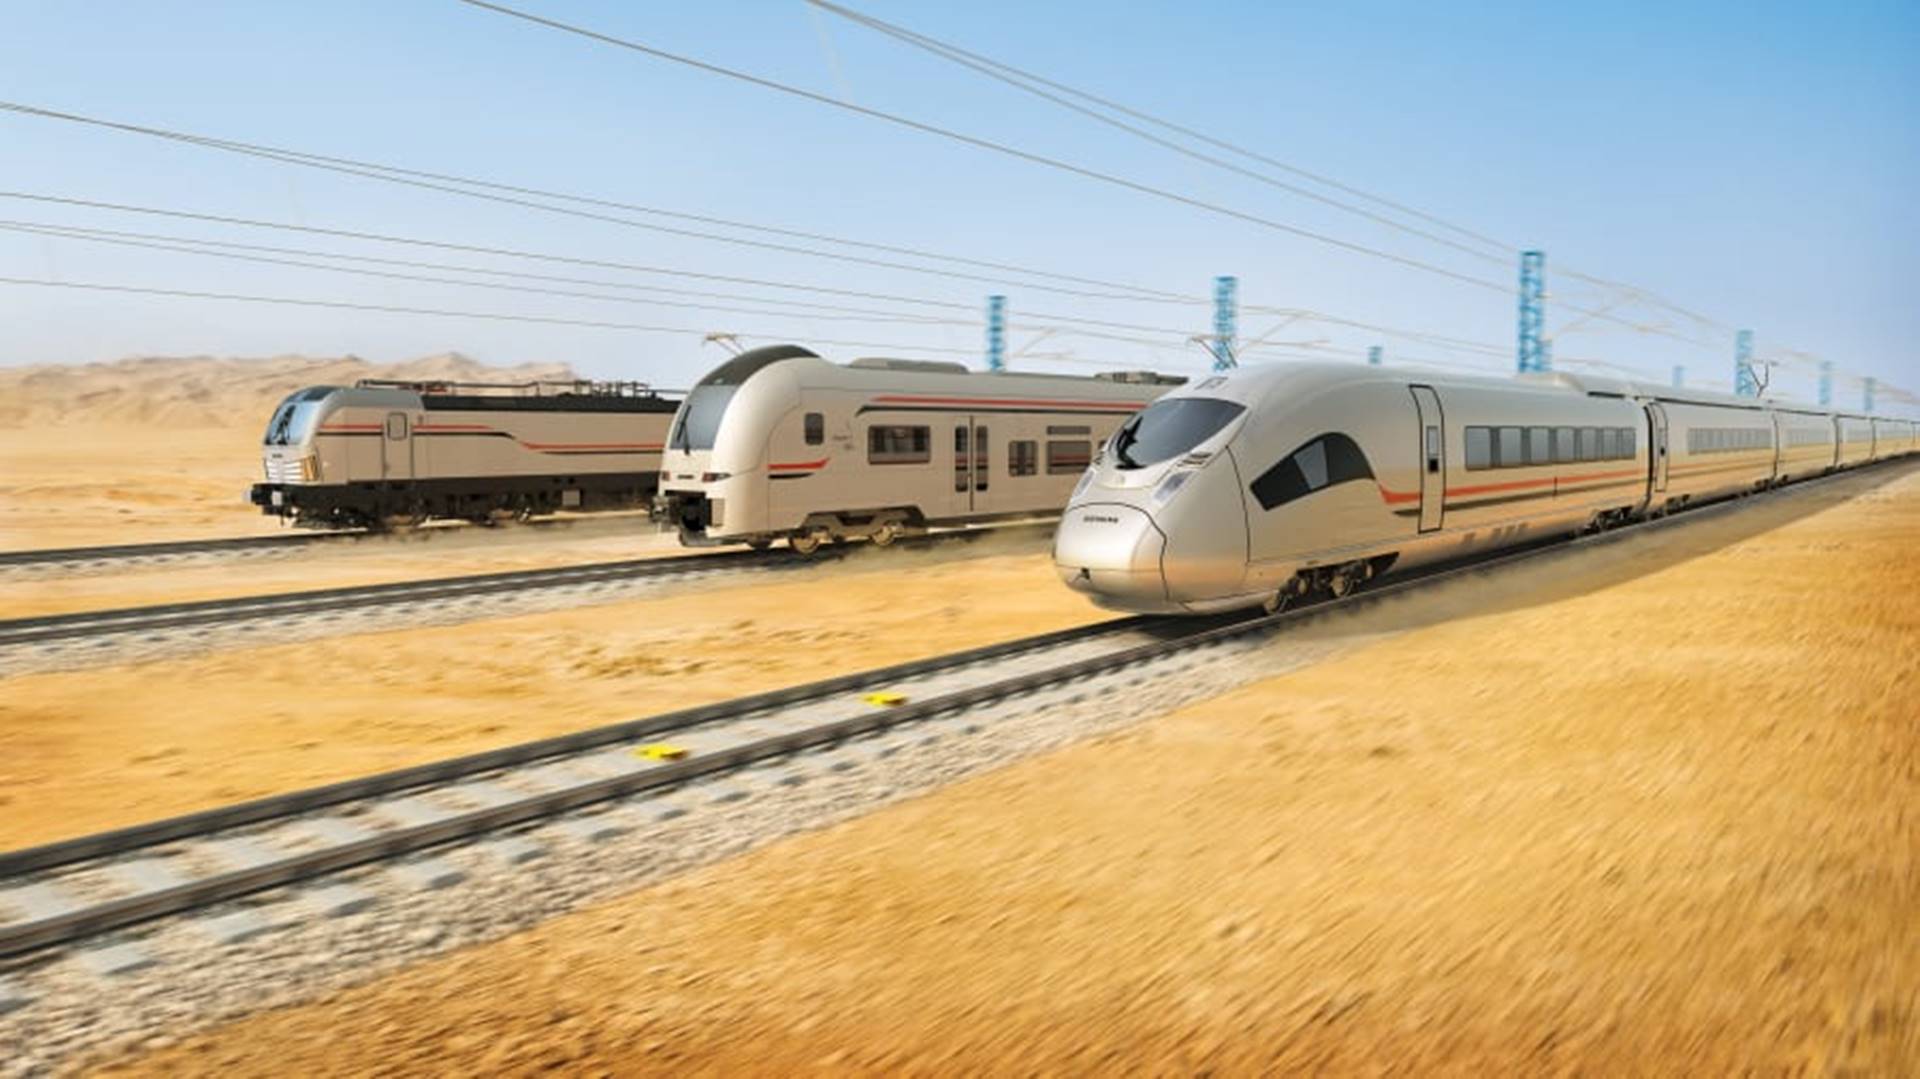 Egypt is building a $4.5 billion high-speed rail line (Photo-Gallery)